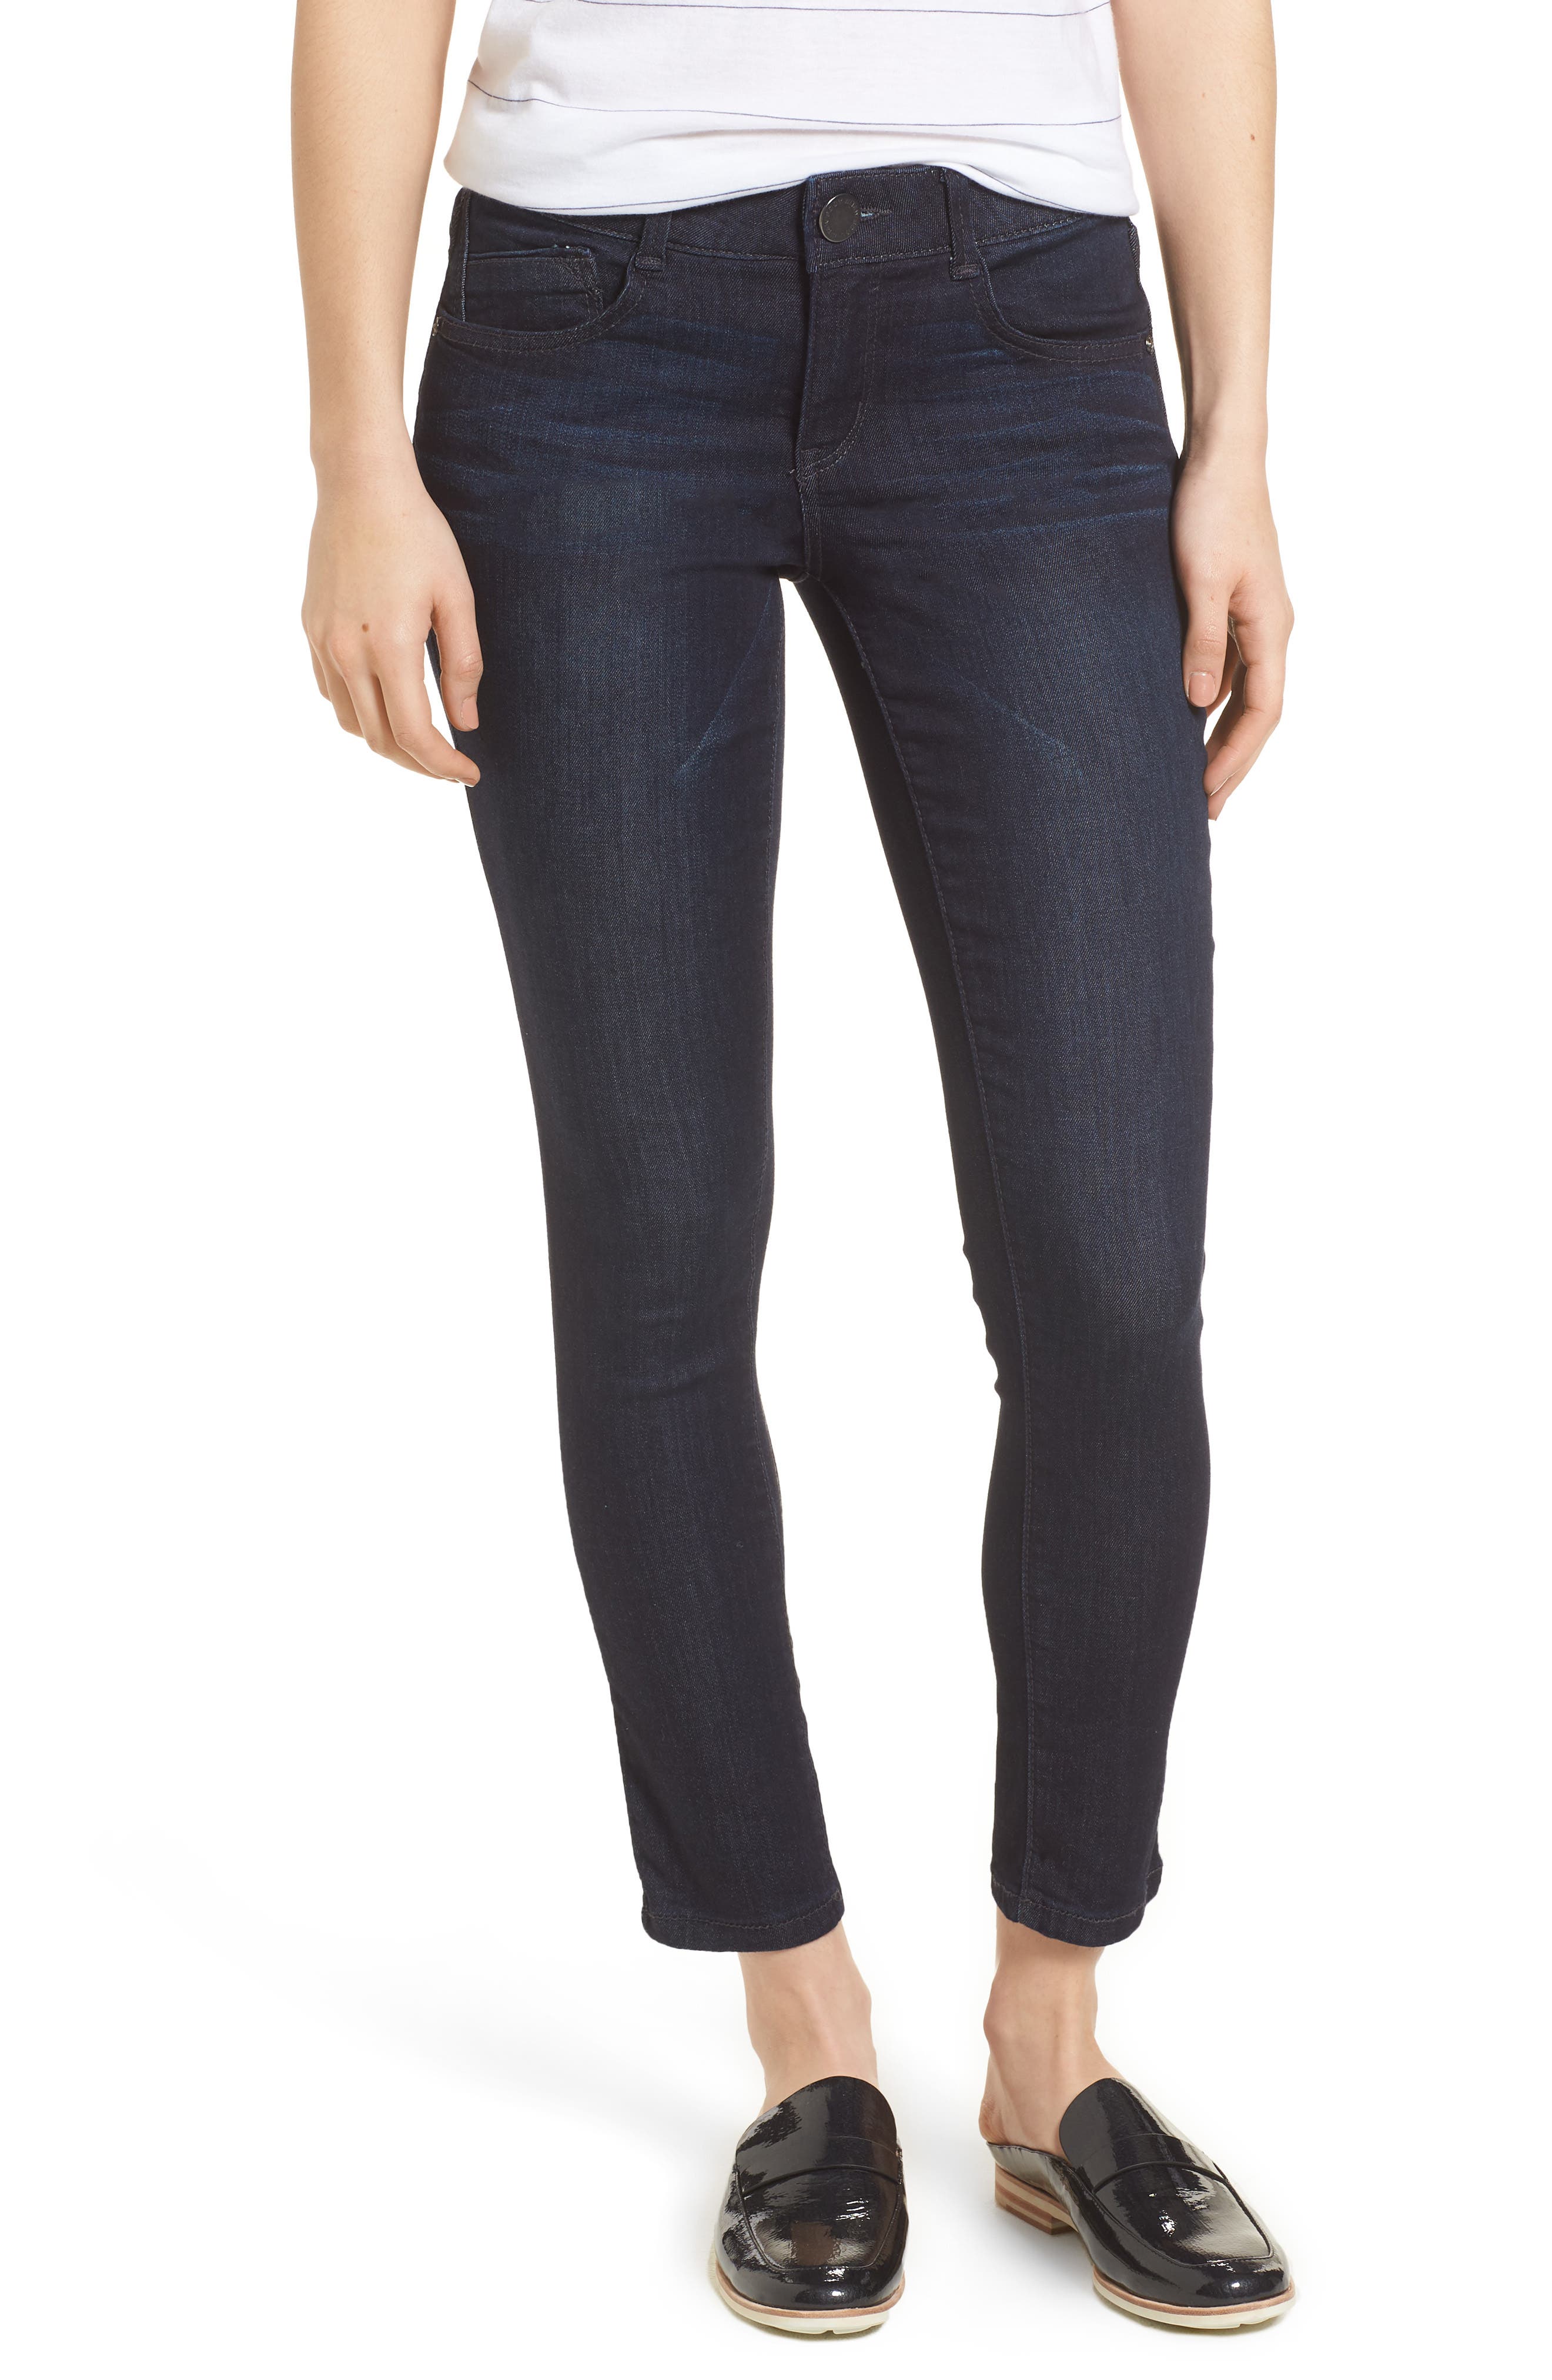 wit and wisdom ankle skimmer jeans